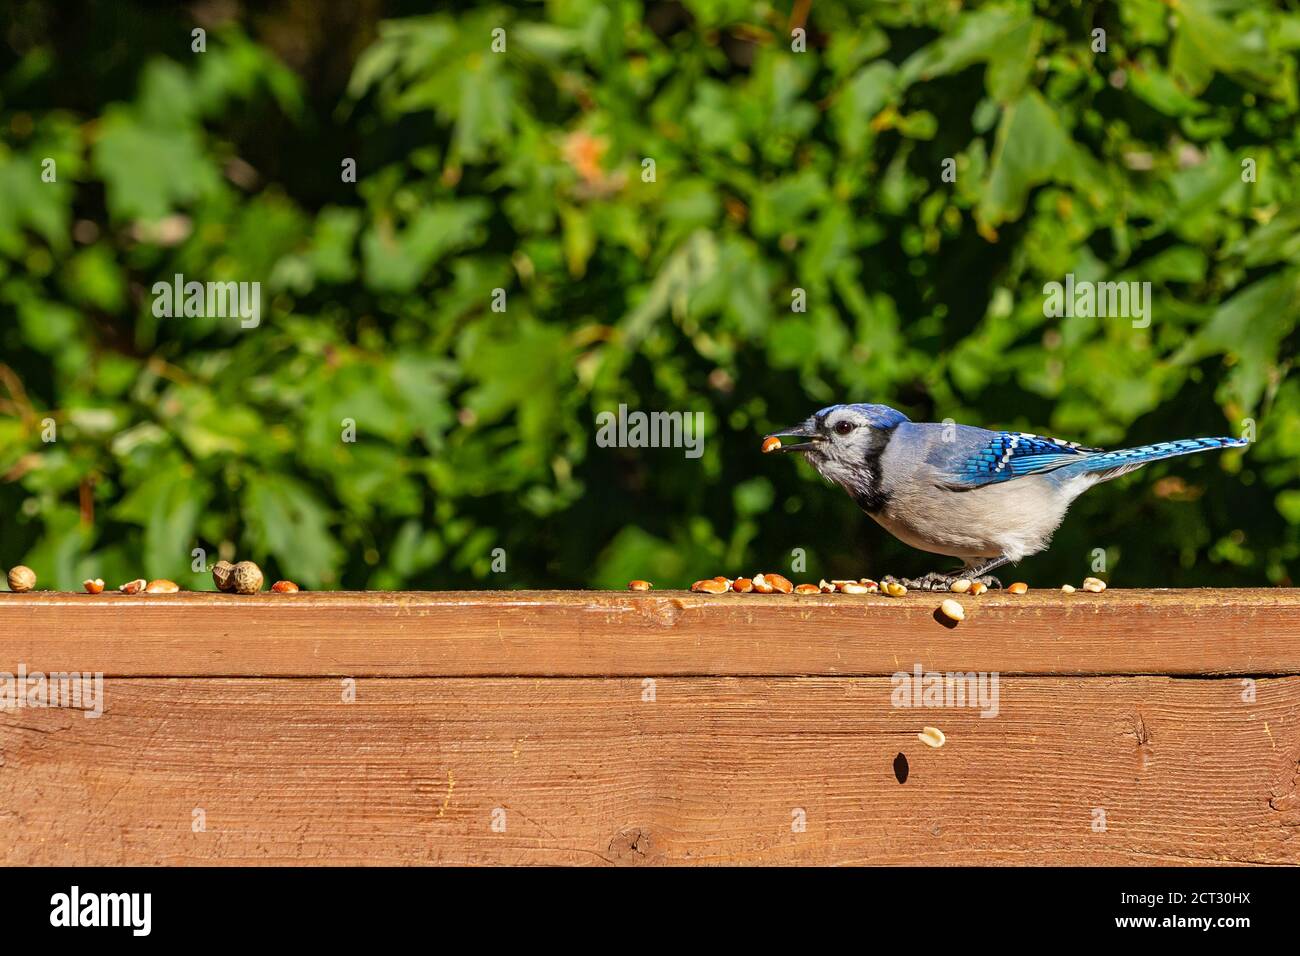 Blue jay eating peanuts on a wooden railing. Stock Photo